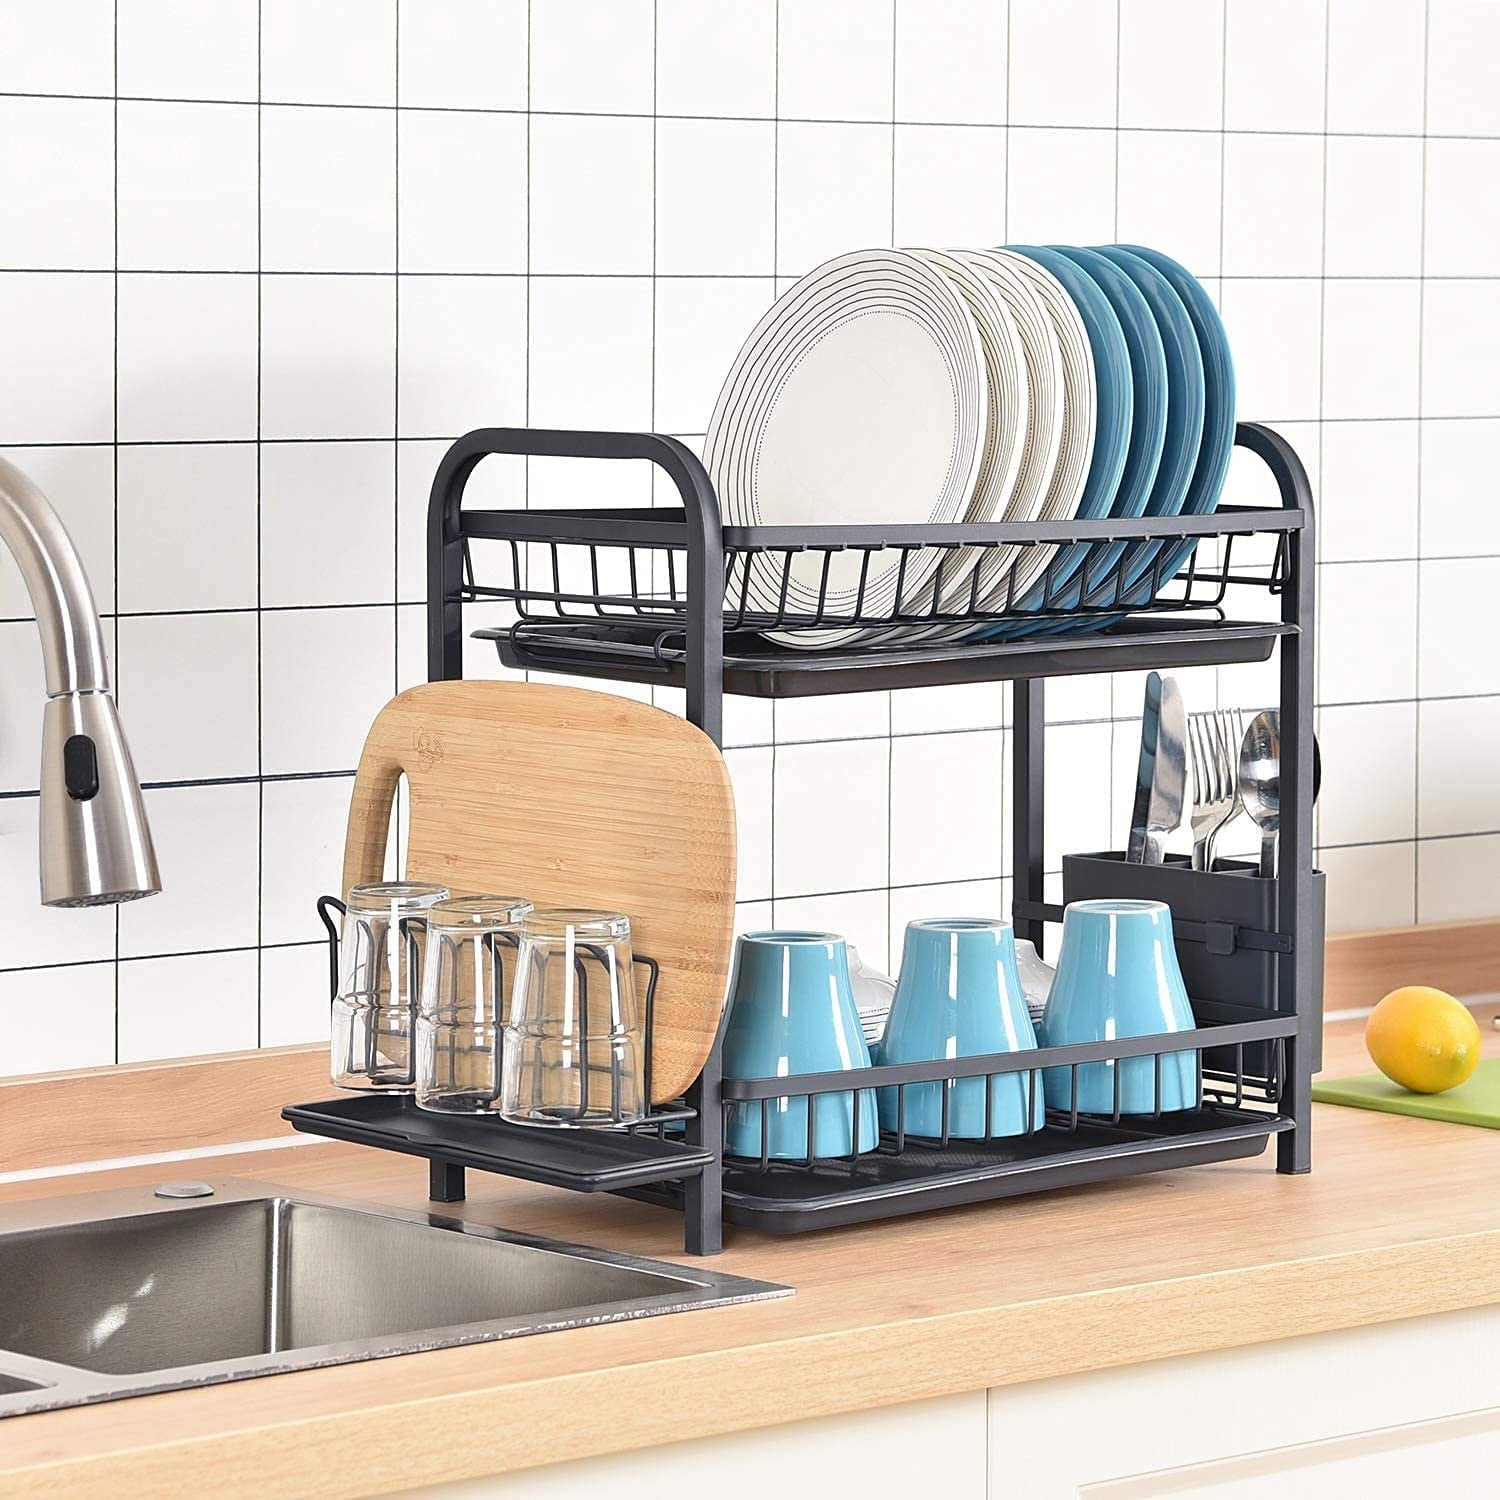 https://ak1.ostkcdn.com/images/products/is/images/direct/b9a4b84bb675b5a733b221eeea3981b5ca10eaab/2-Tier-Dish-Rack-and-Drainboard-Set-with-Utensil-Holder.jpg